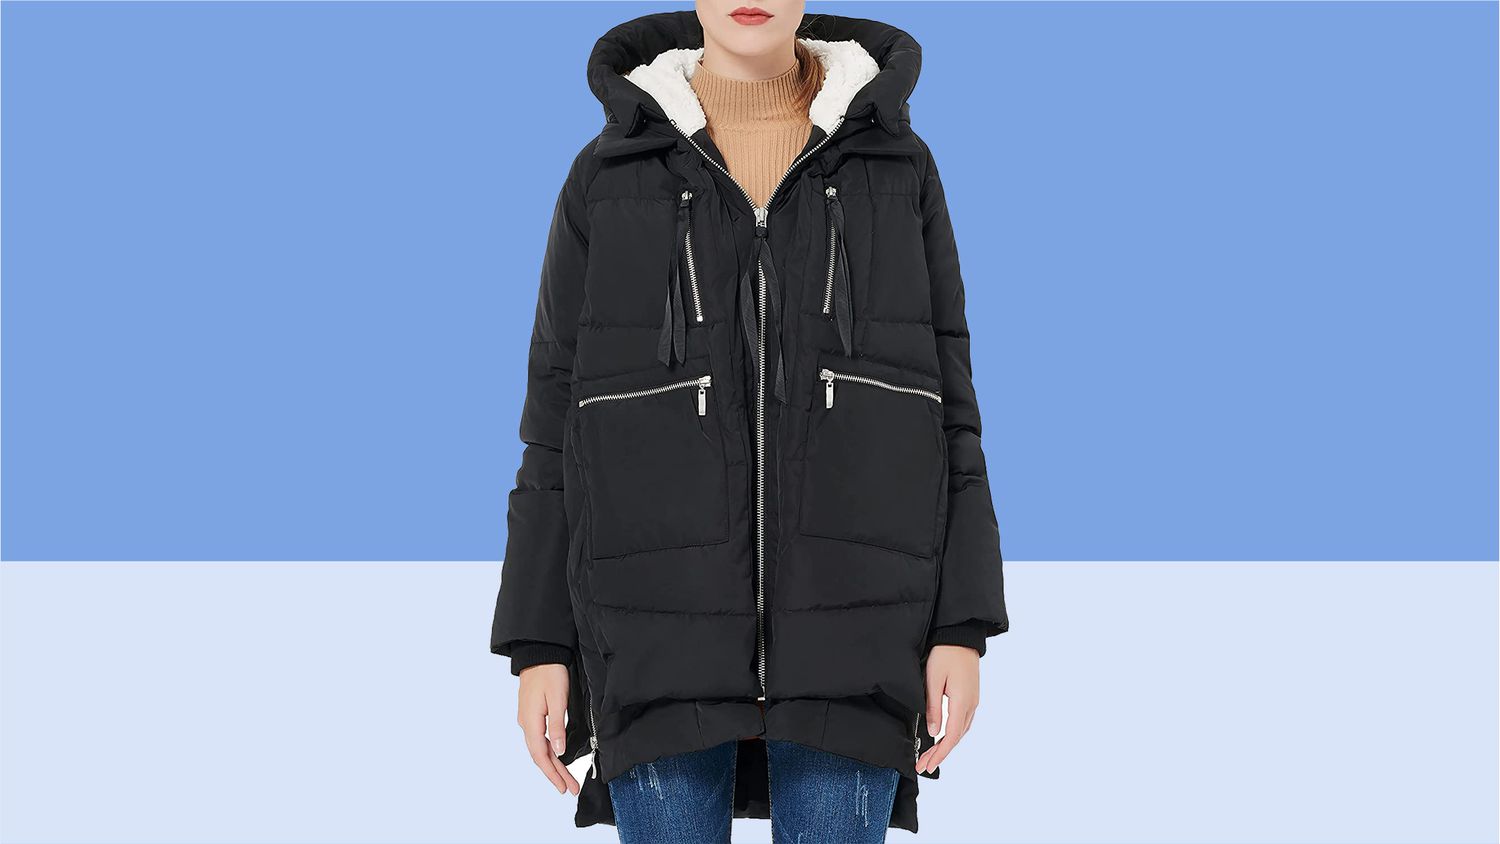 The Orolay Down Jacket Is on Sale at Amazon Right Now